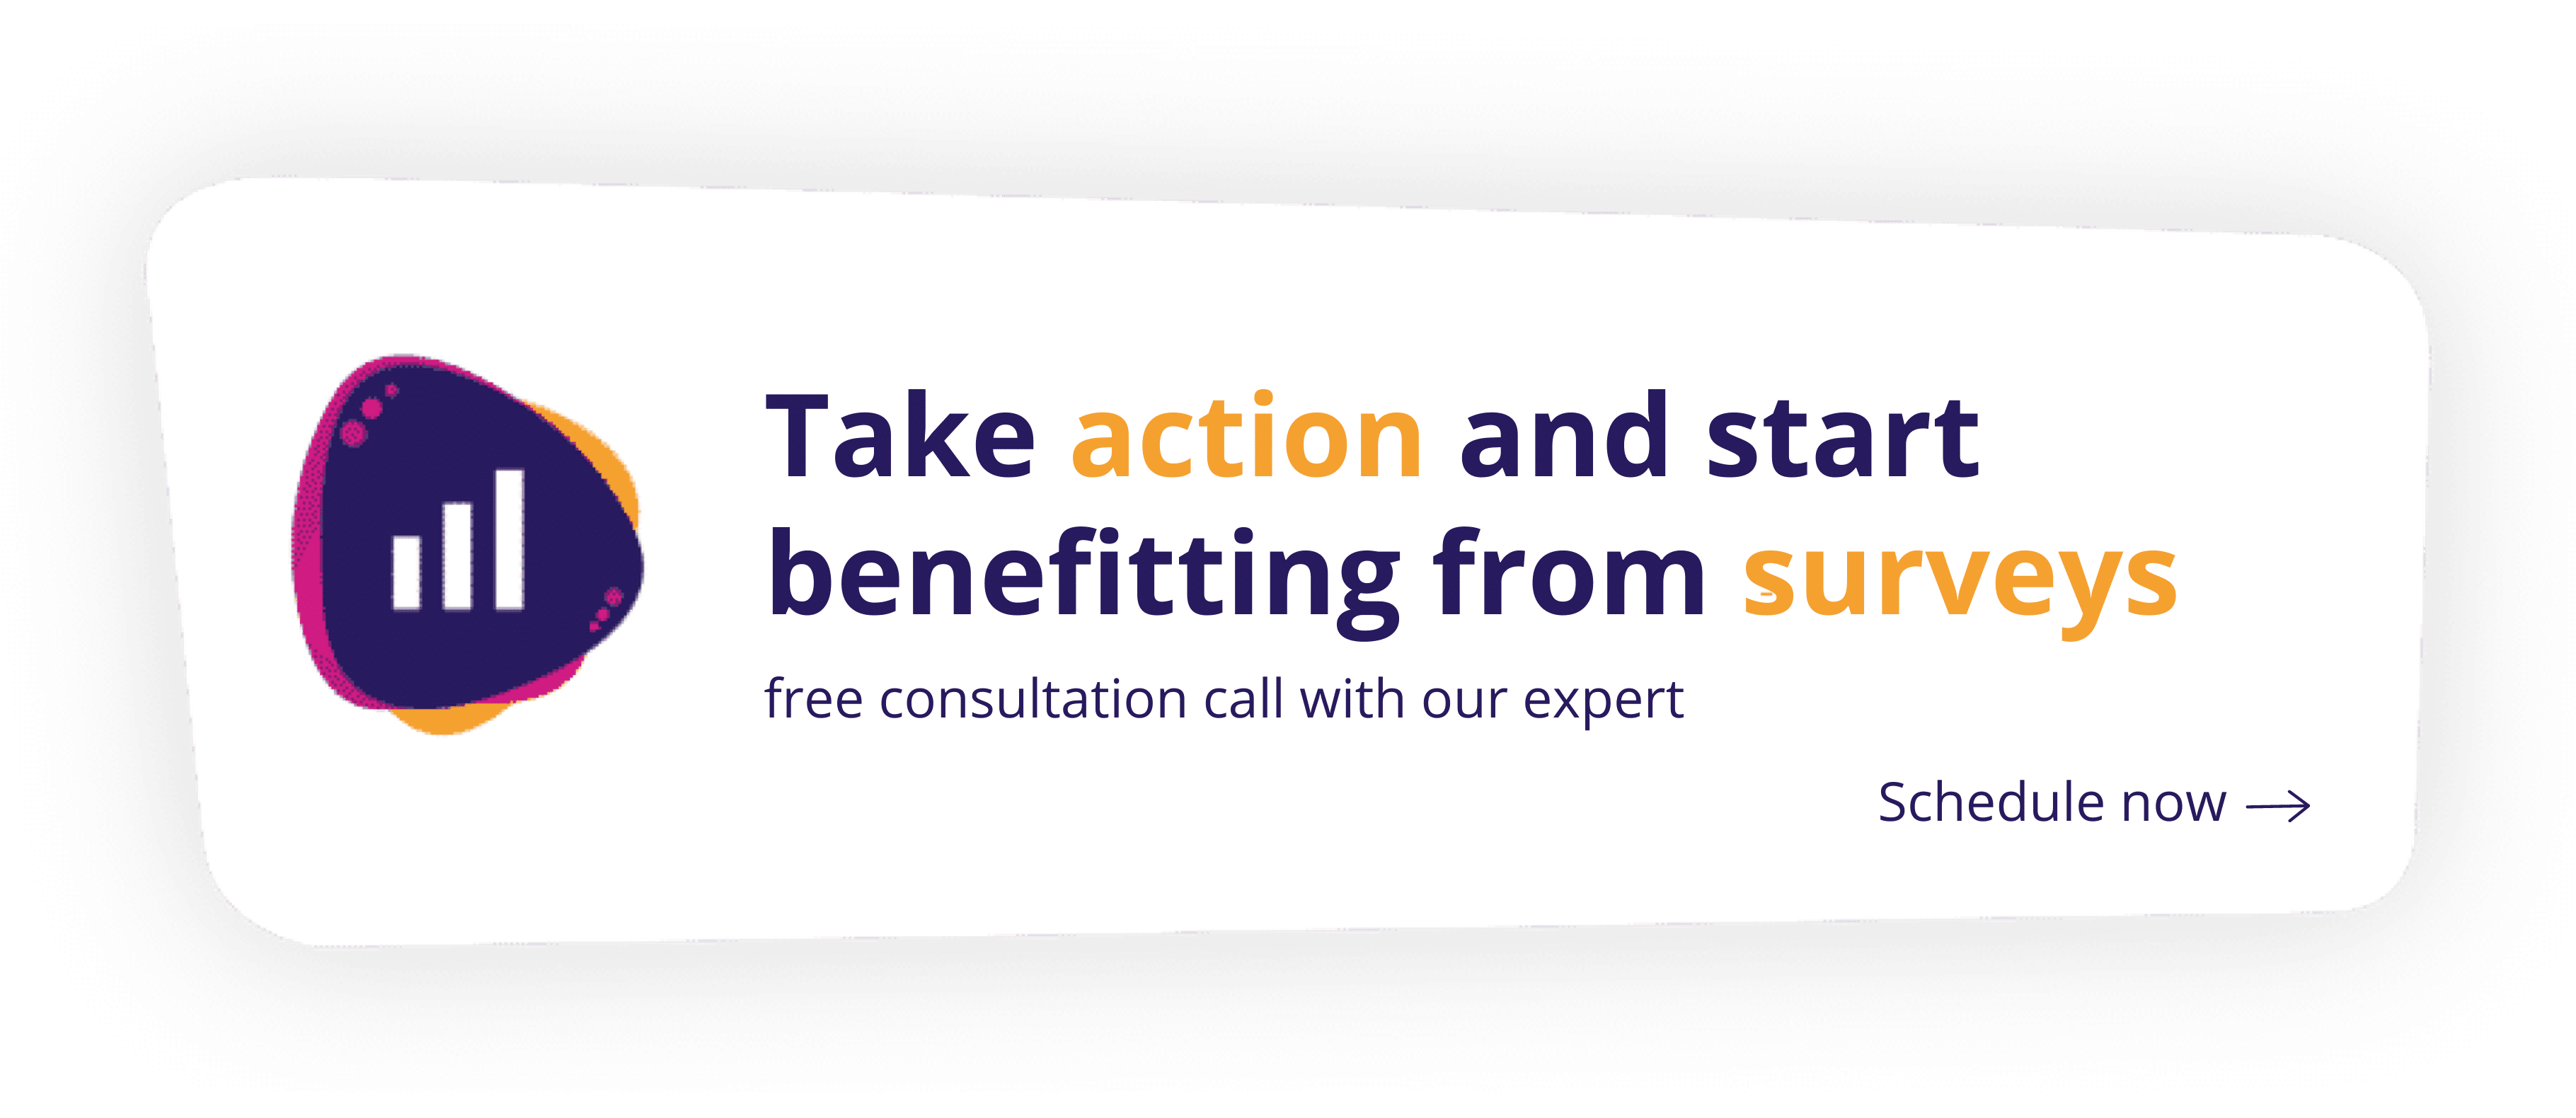 Click here to for a free consultation to take action and start benefitting from surveys and help you clients solve pain points.